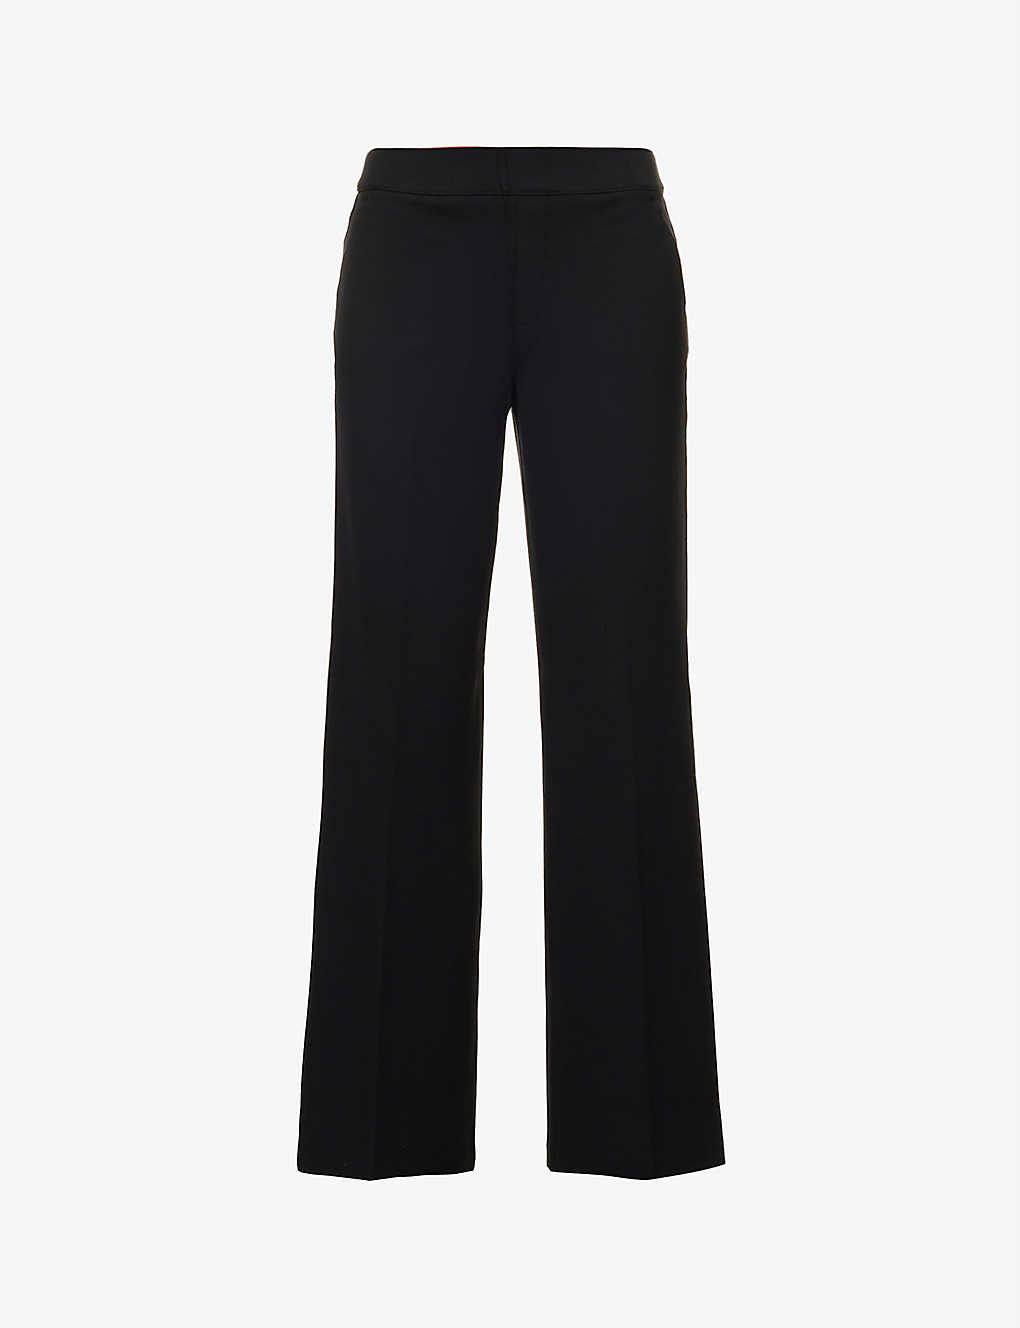 Spanx Womens Classic Black The Perfect Pant Mid-rise Wide-leg Rayon-blend Trousers